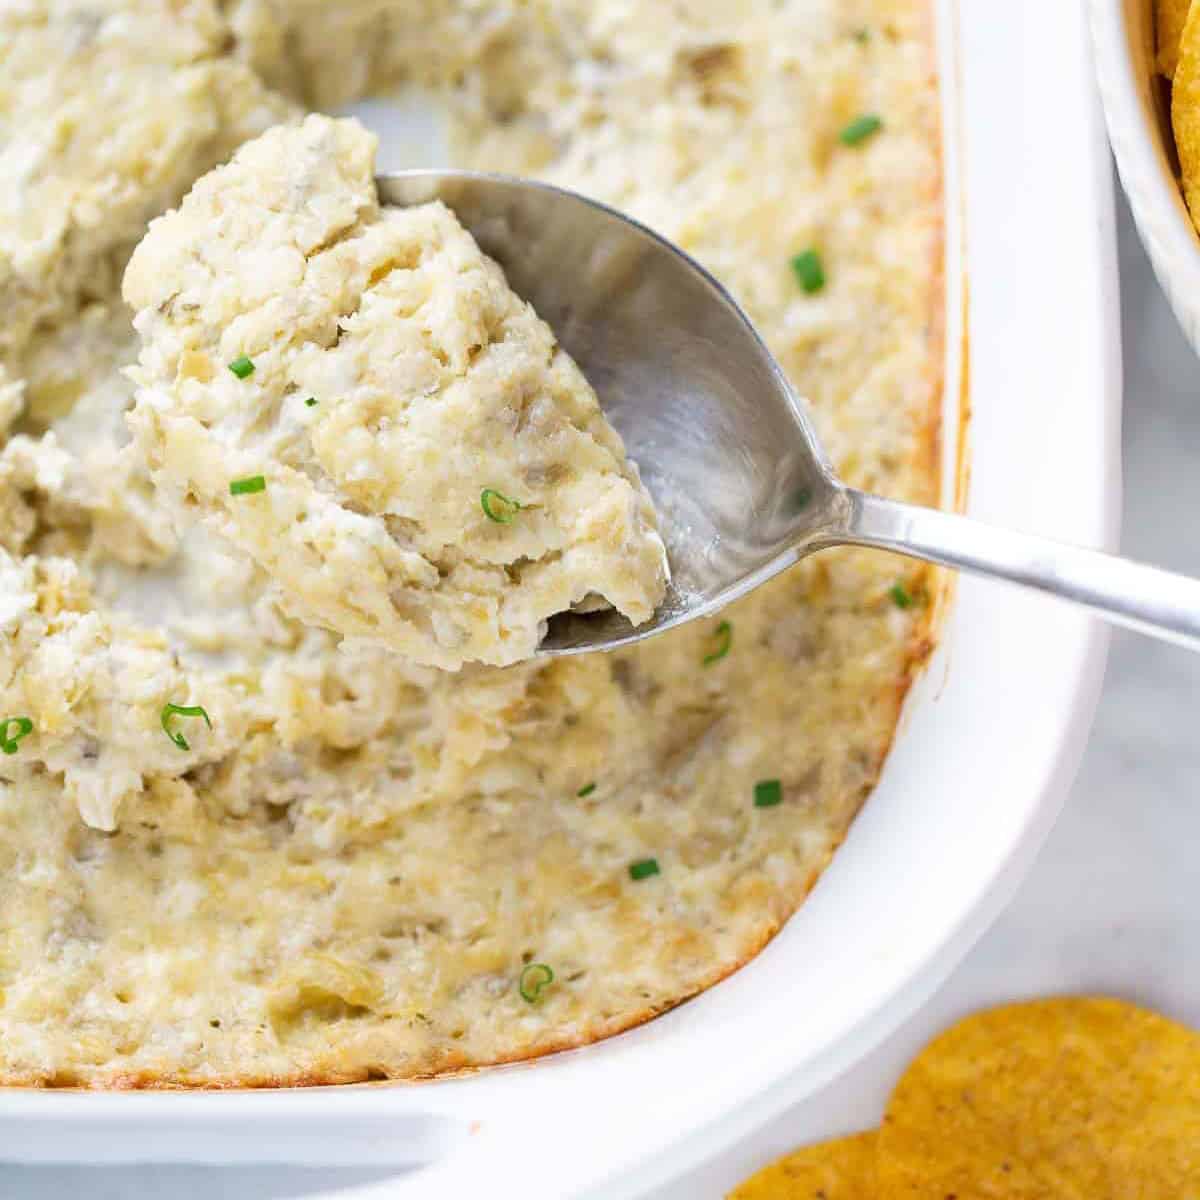 close up image of artichoke dip being scooped with spoon